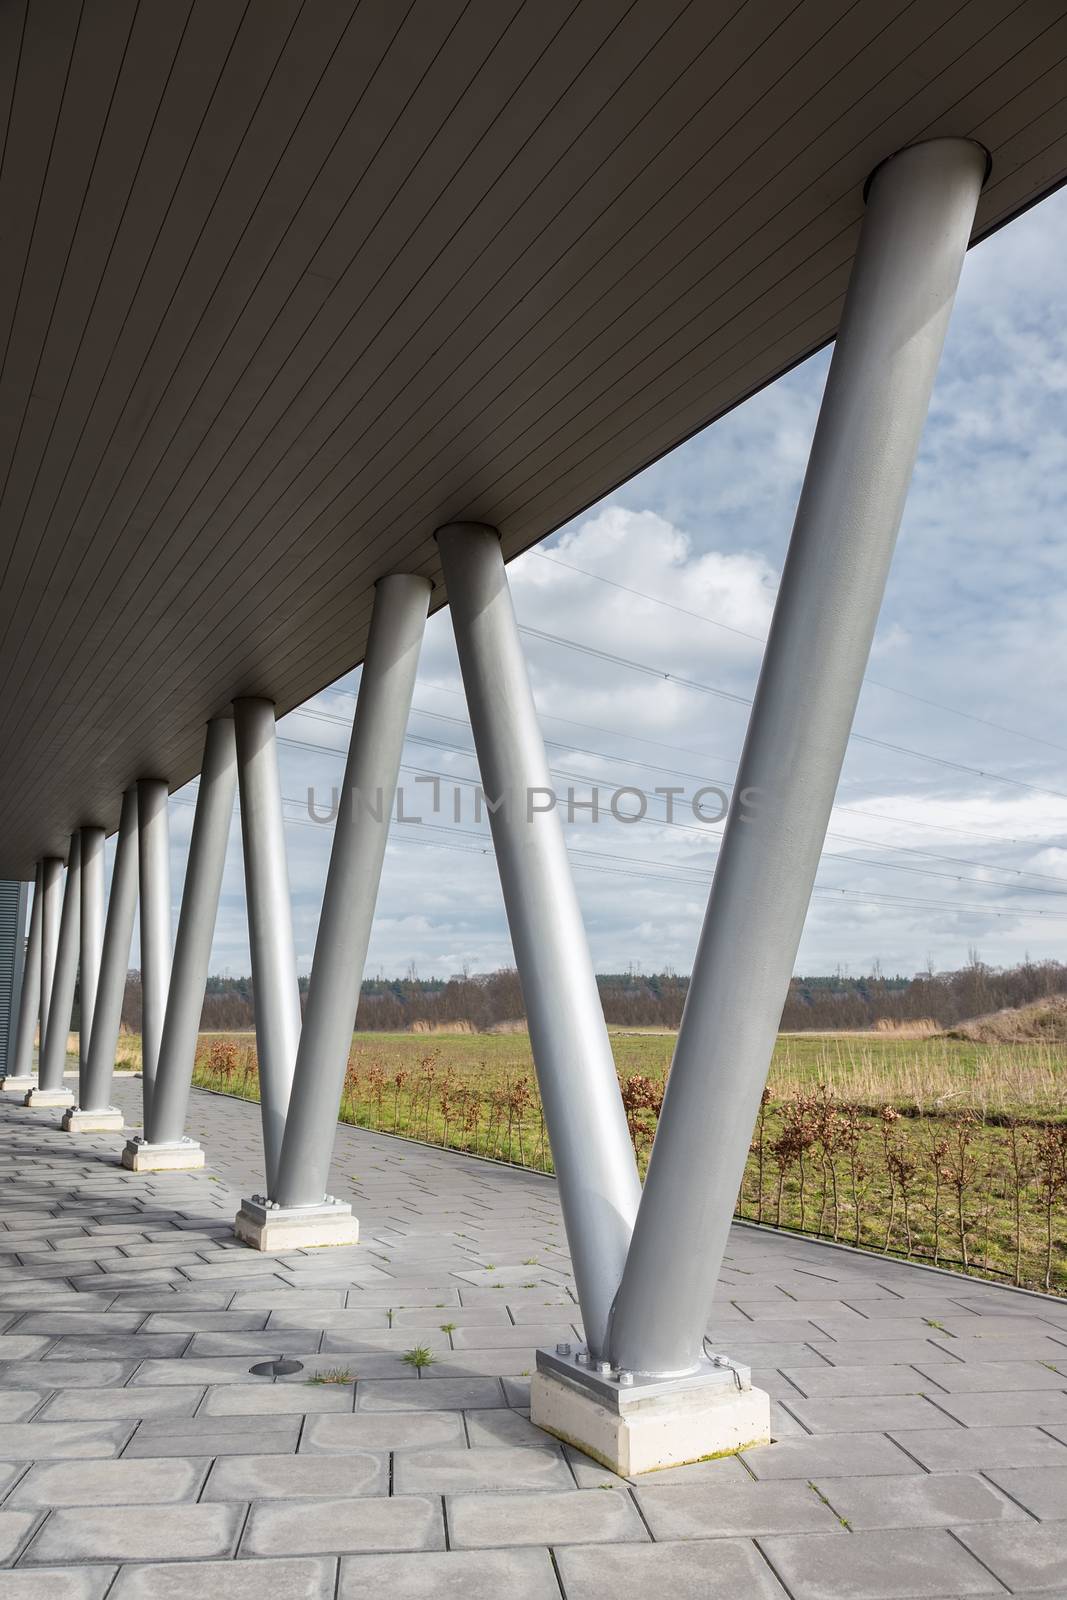 V- shaped metal pillars under roof of building by BenSchonewille